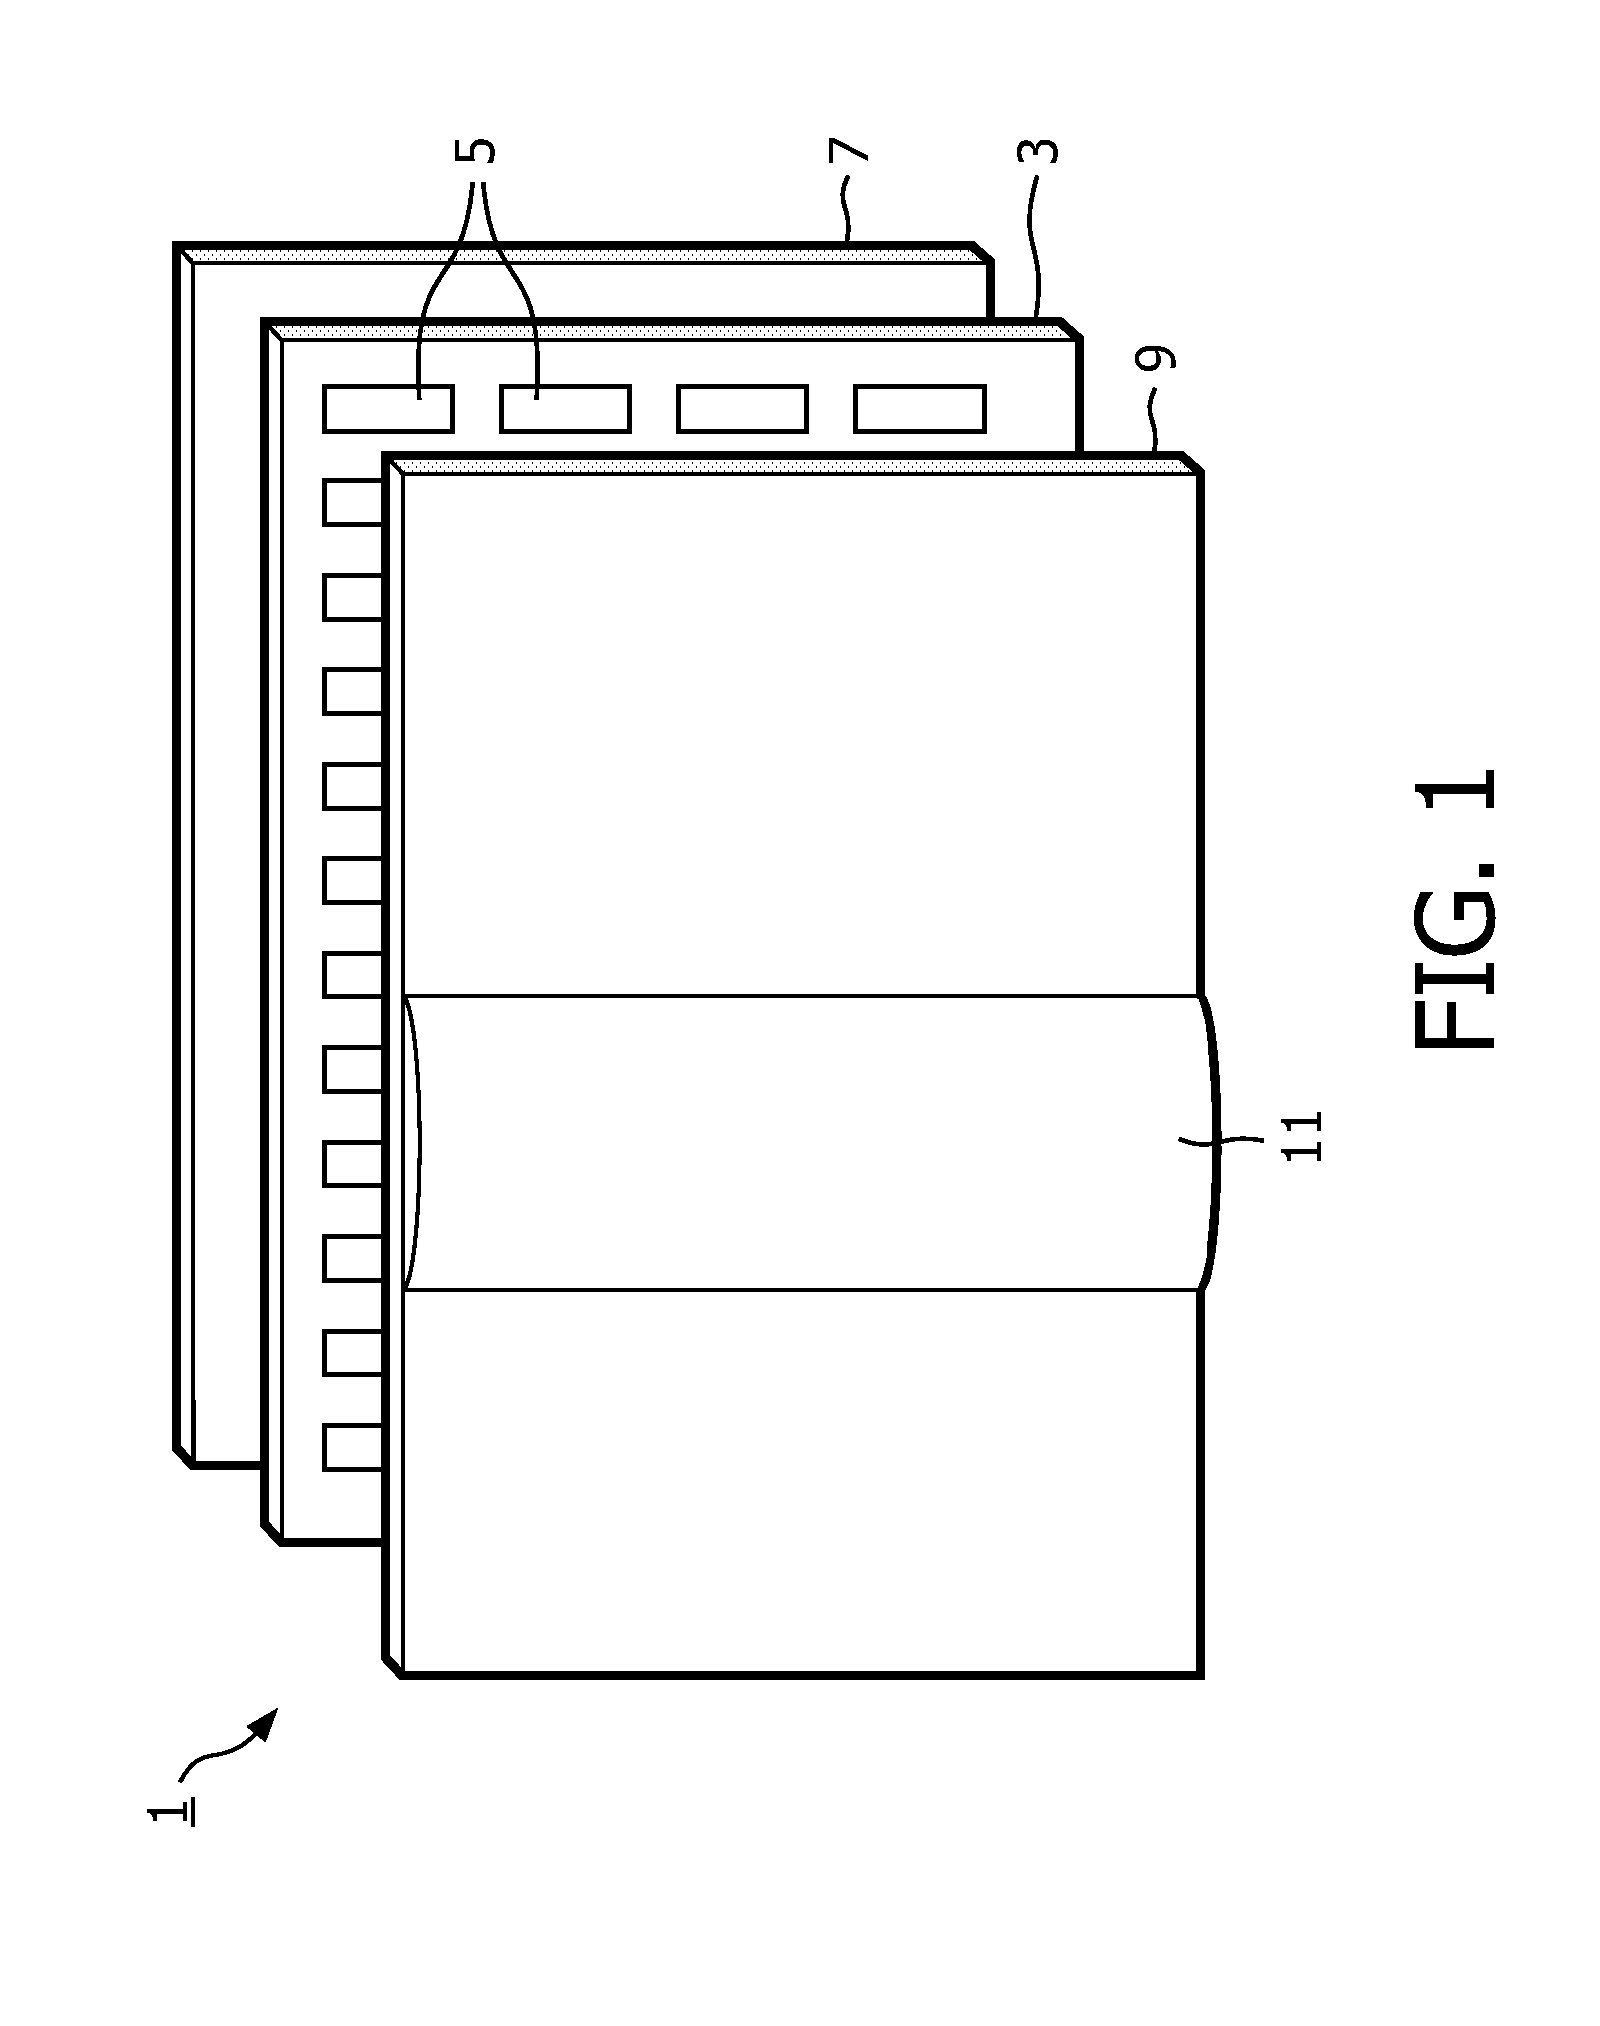 Multi-view autostereoscopic display device